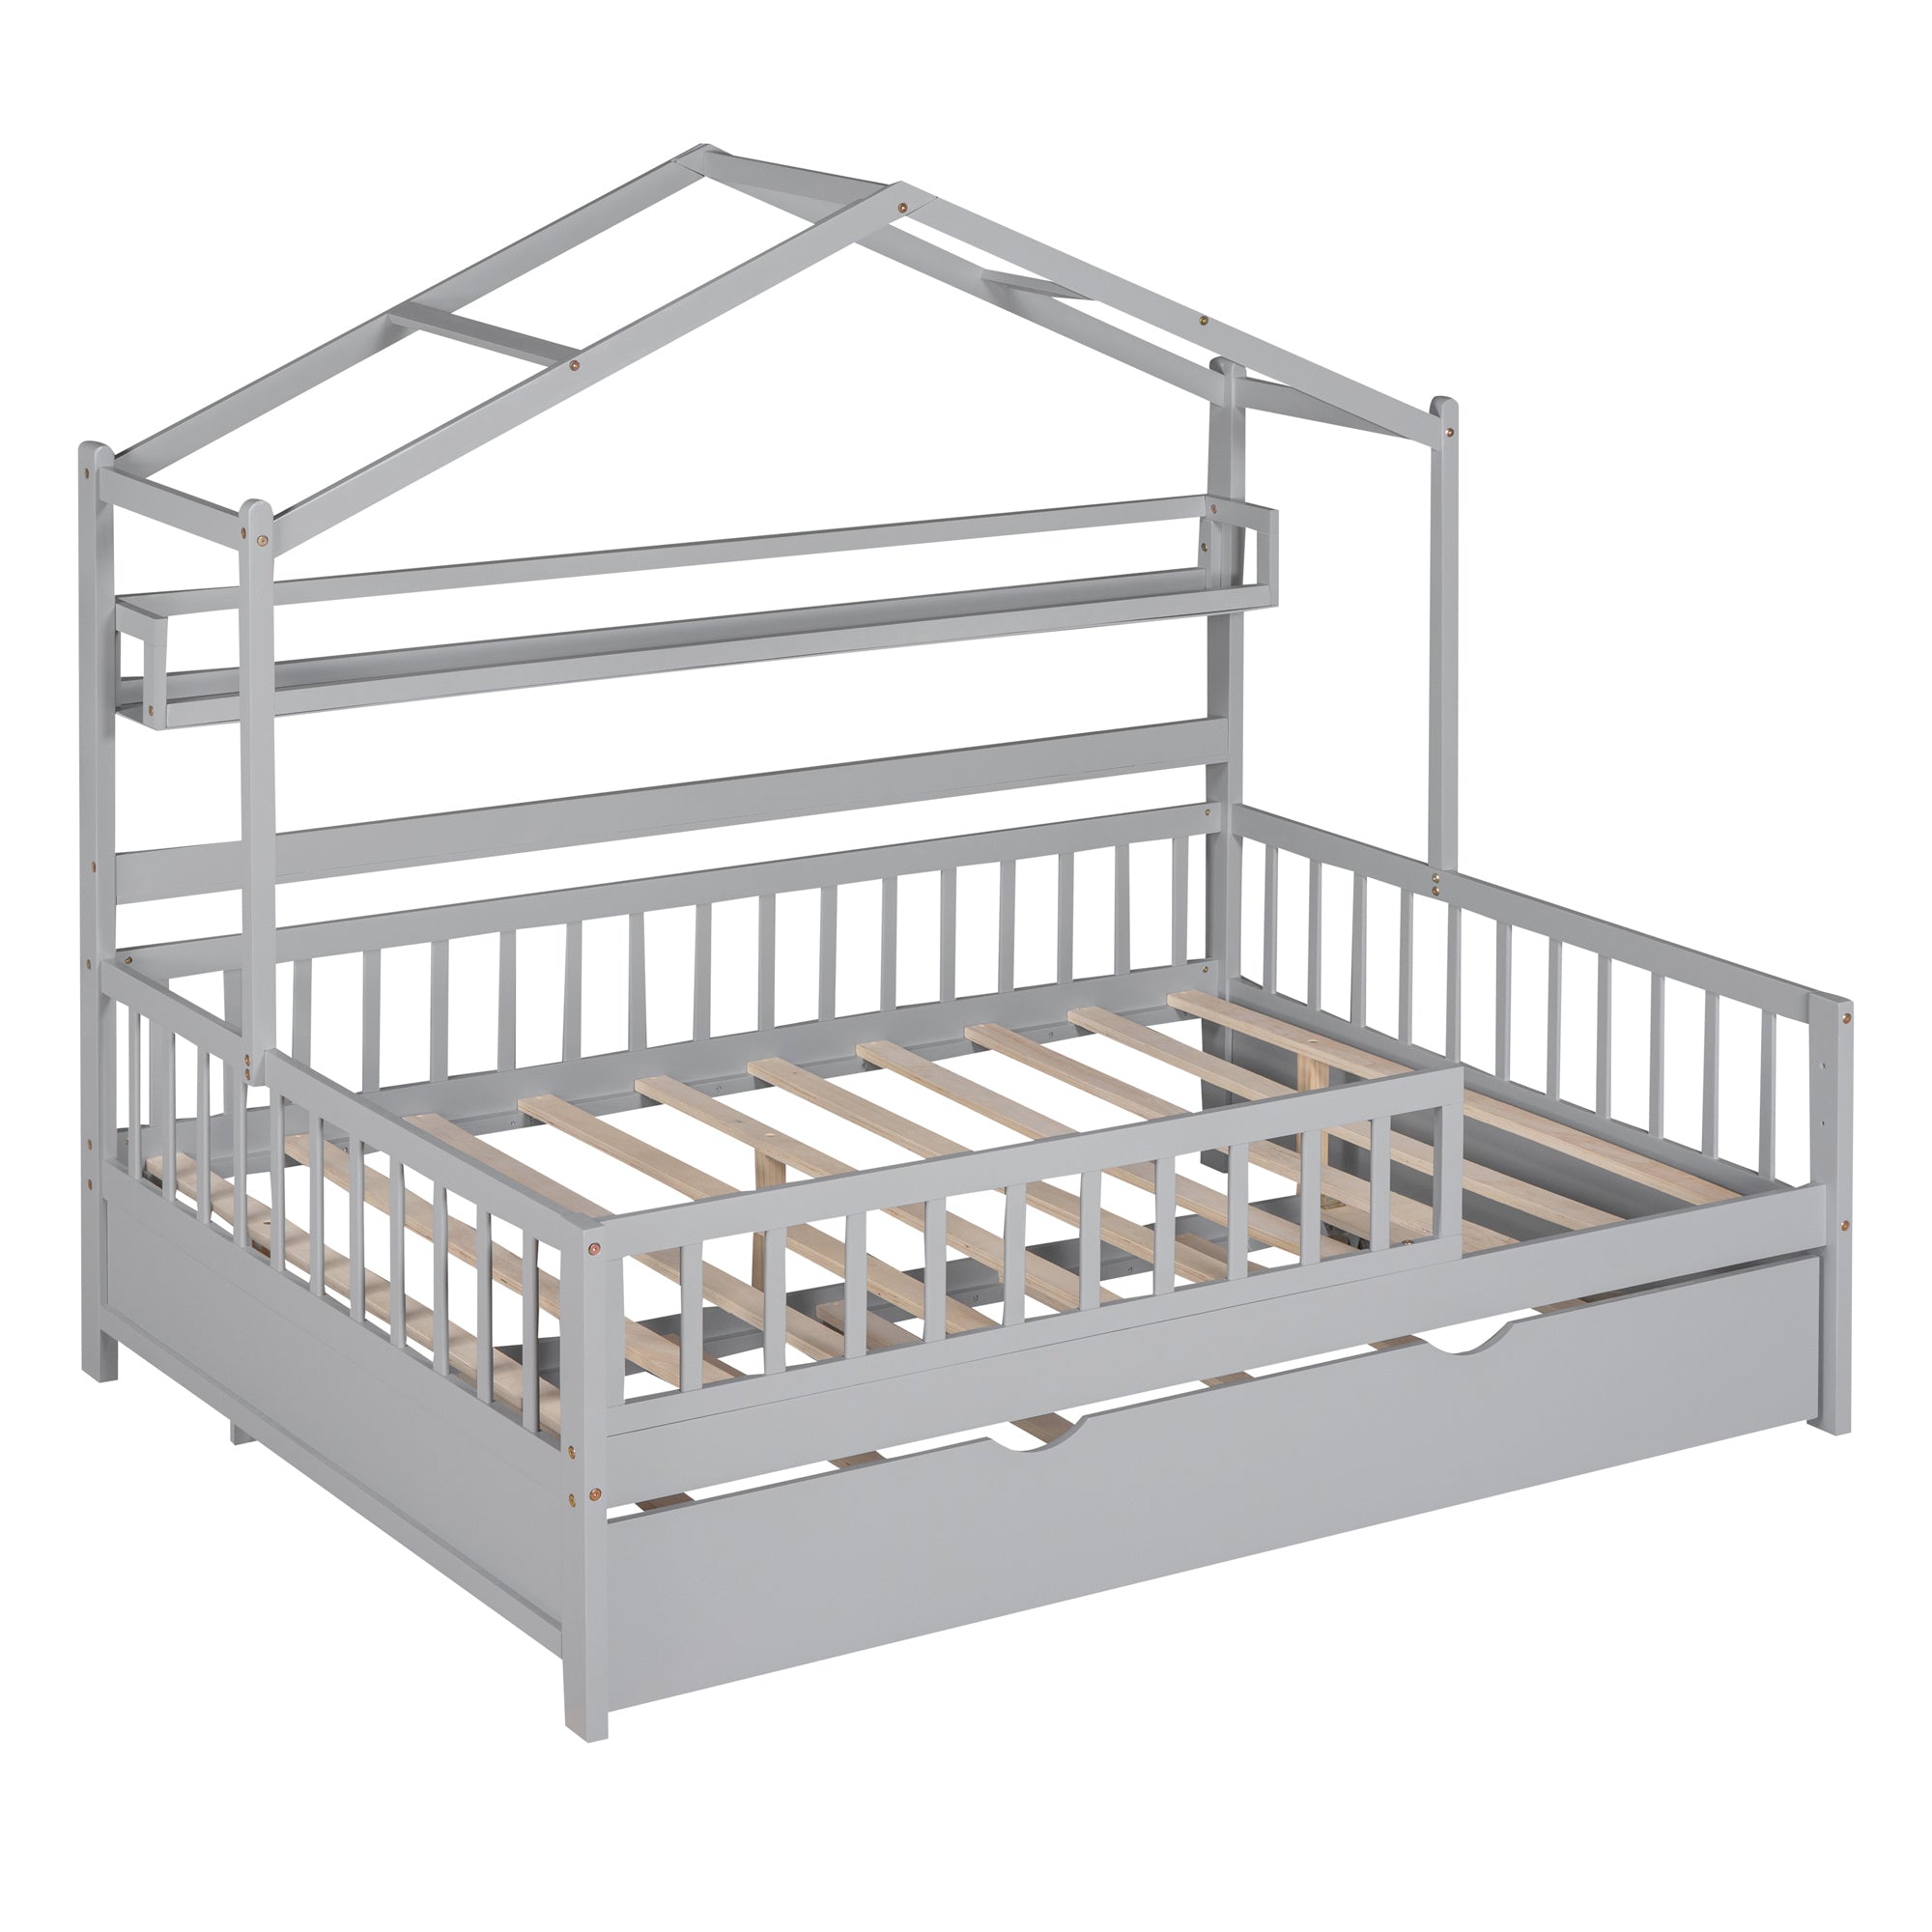 ZNTS Wooden Full Size House Bed with Twin Size Trundle,Kids Bed with Shelf, Gray WF301683AAE